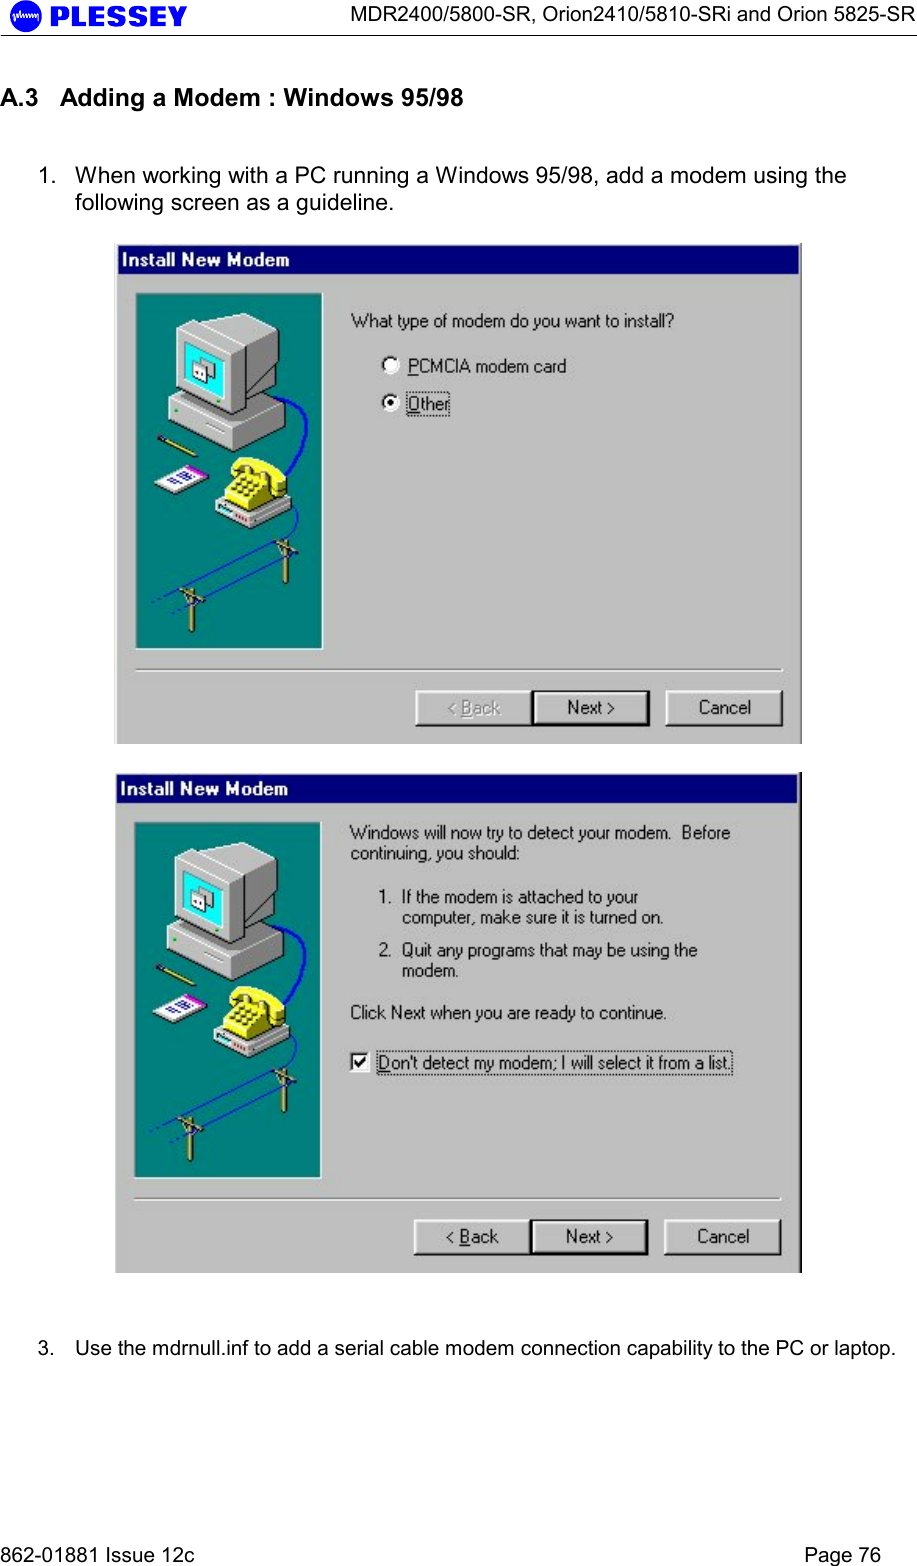      MDR2400/5800-SR, Orion2410/5810-SRi and Orion 5825-SR   862-01881 Issue 12c    Page 76 A.3  Adding a Modem : Windows 95/98  1.  When working with a PC running a Windows 95/98, add a modem using the following screen as a guideline.       3.  Use the mdrnull.inf to add a serial cable modem connection capability to the PC or laptop.  